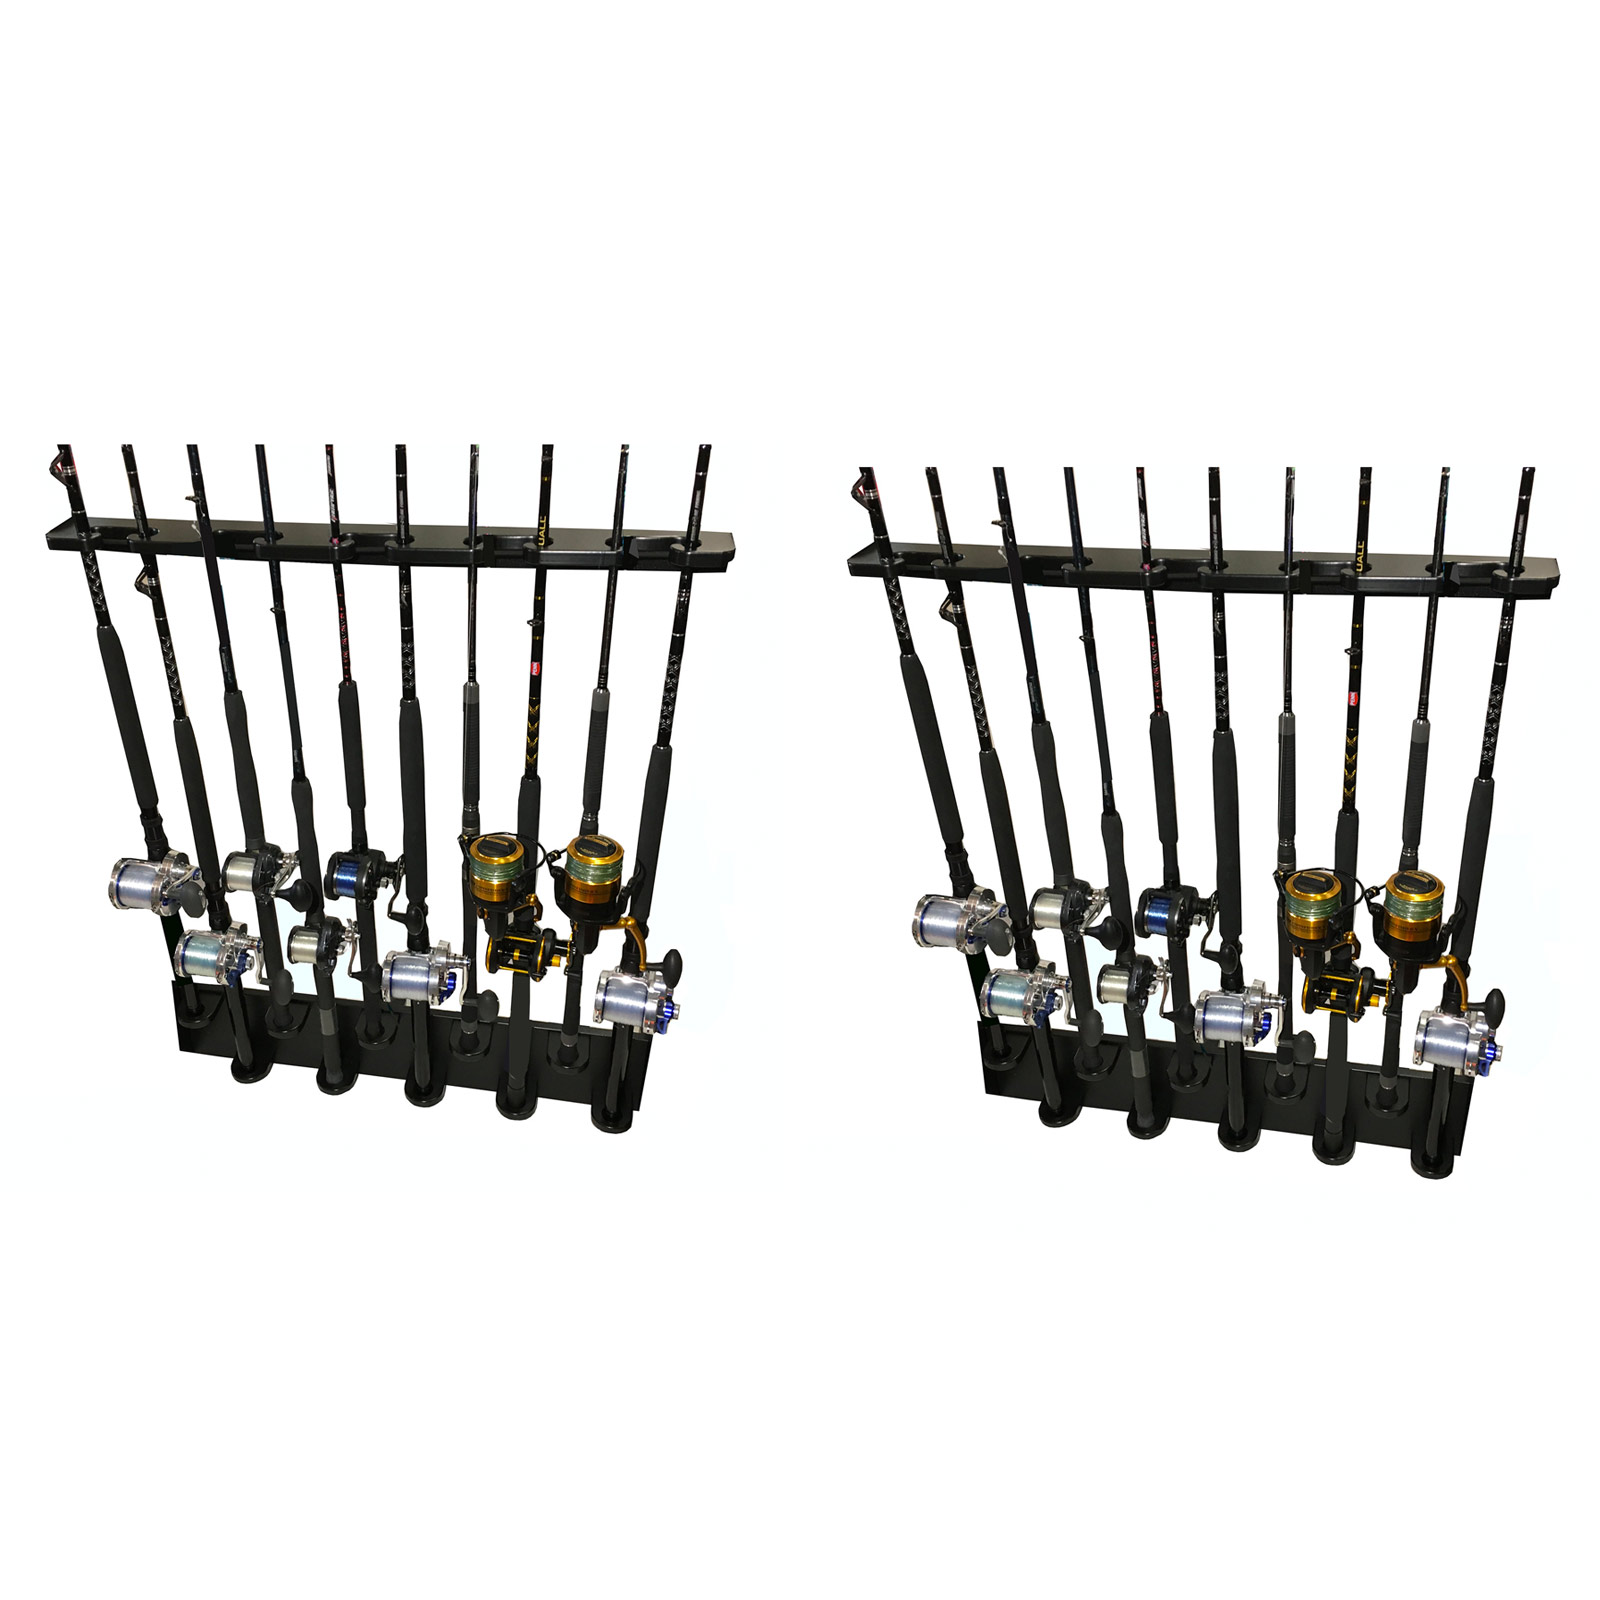 Vertical Wall Mount For 10 Rods & Reels With Varied Heights For Maximum  Space